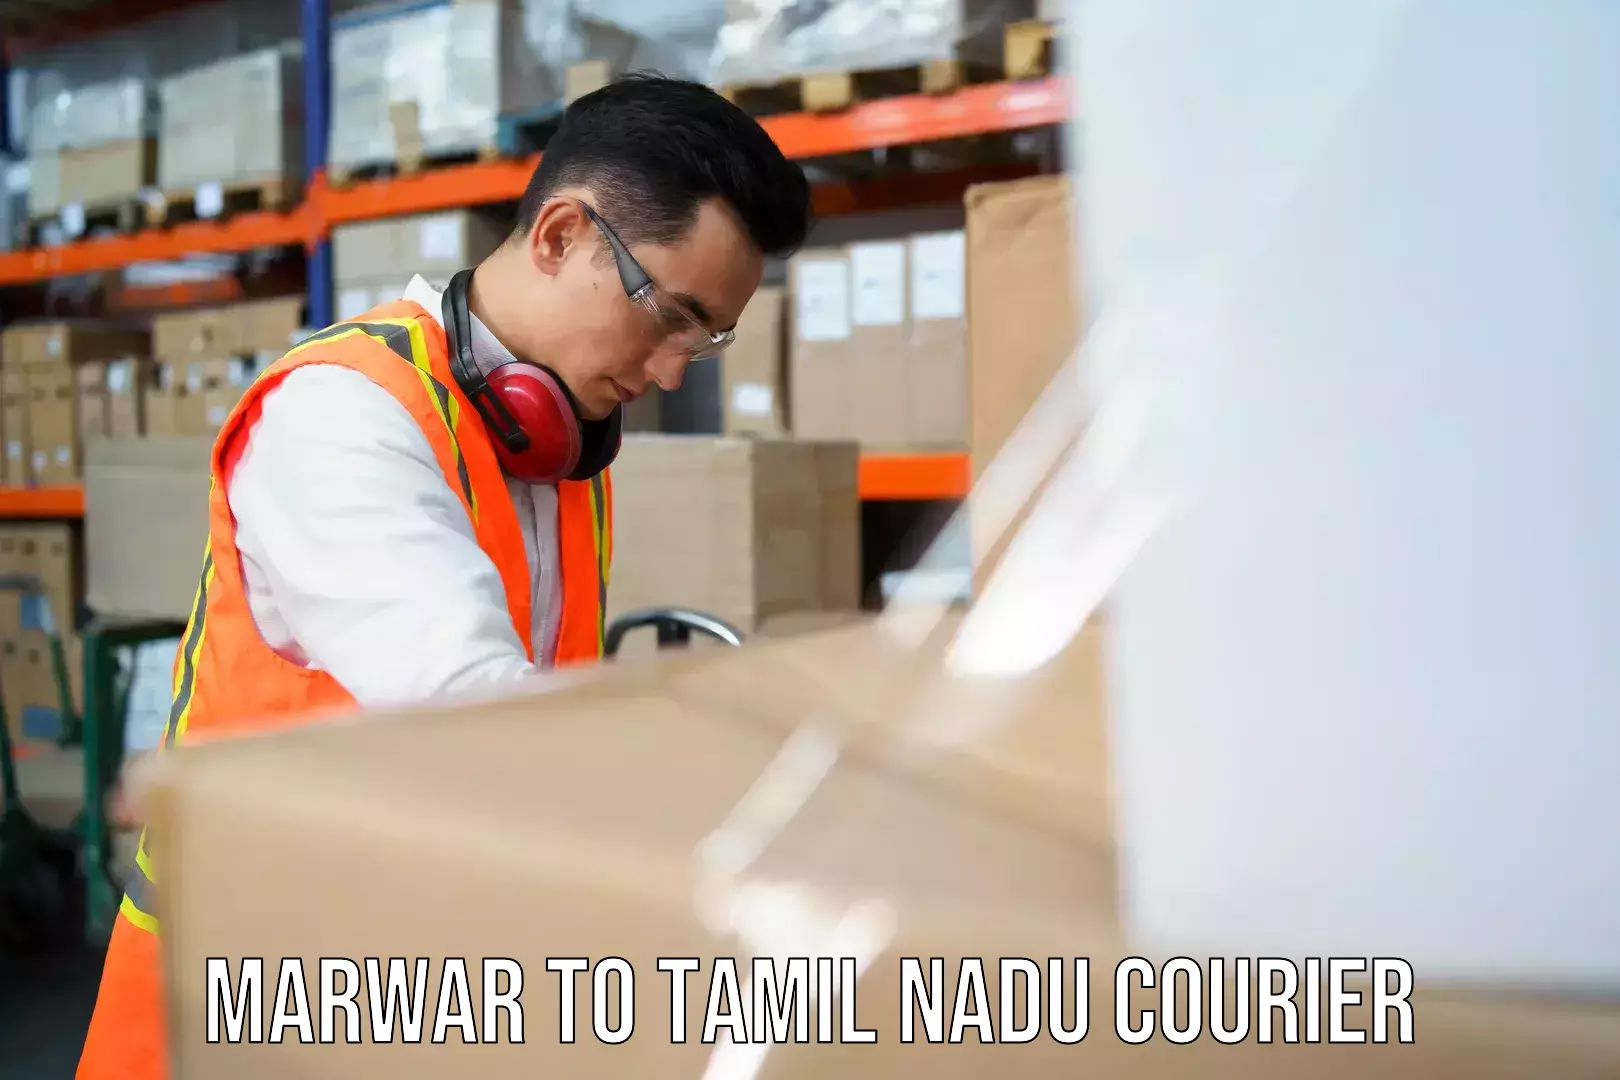 Comprehensive shipping network Marwar to Hosur